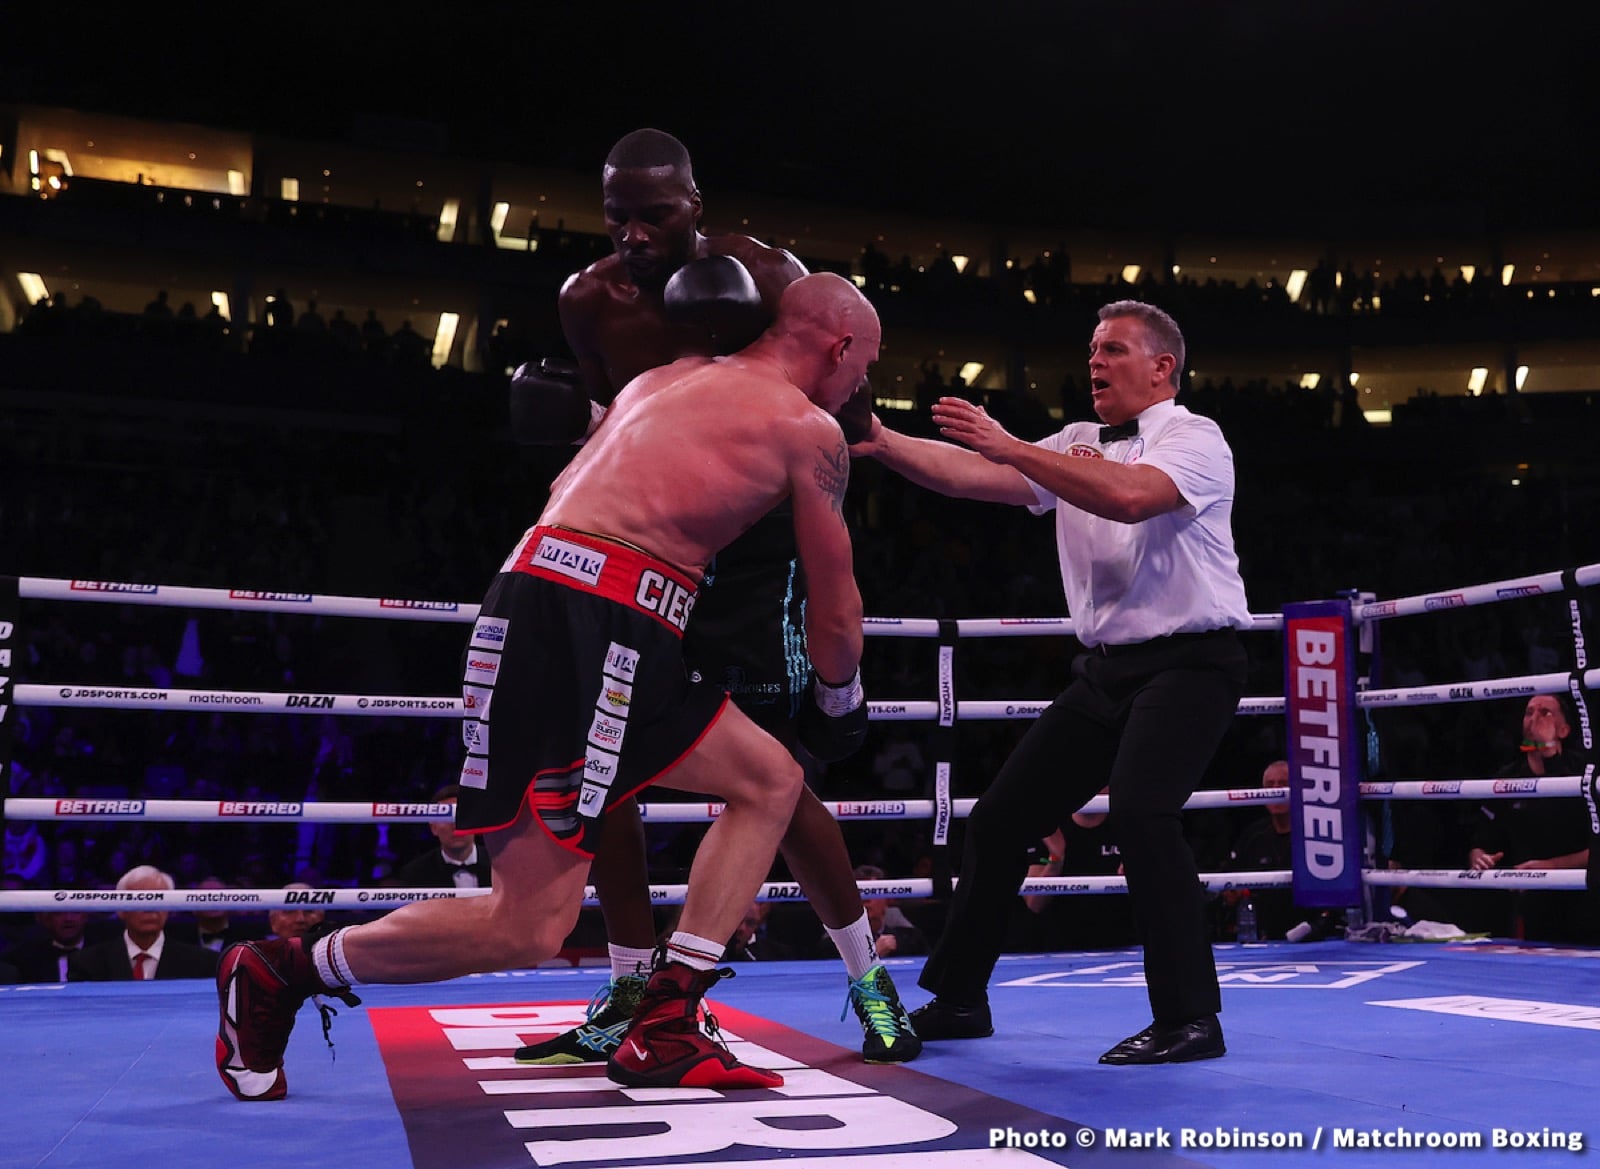 Lawrence Okolie vs. Michal Cieslak - LIVE action results from O2 in London